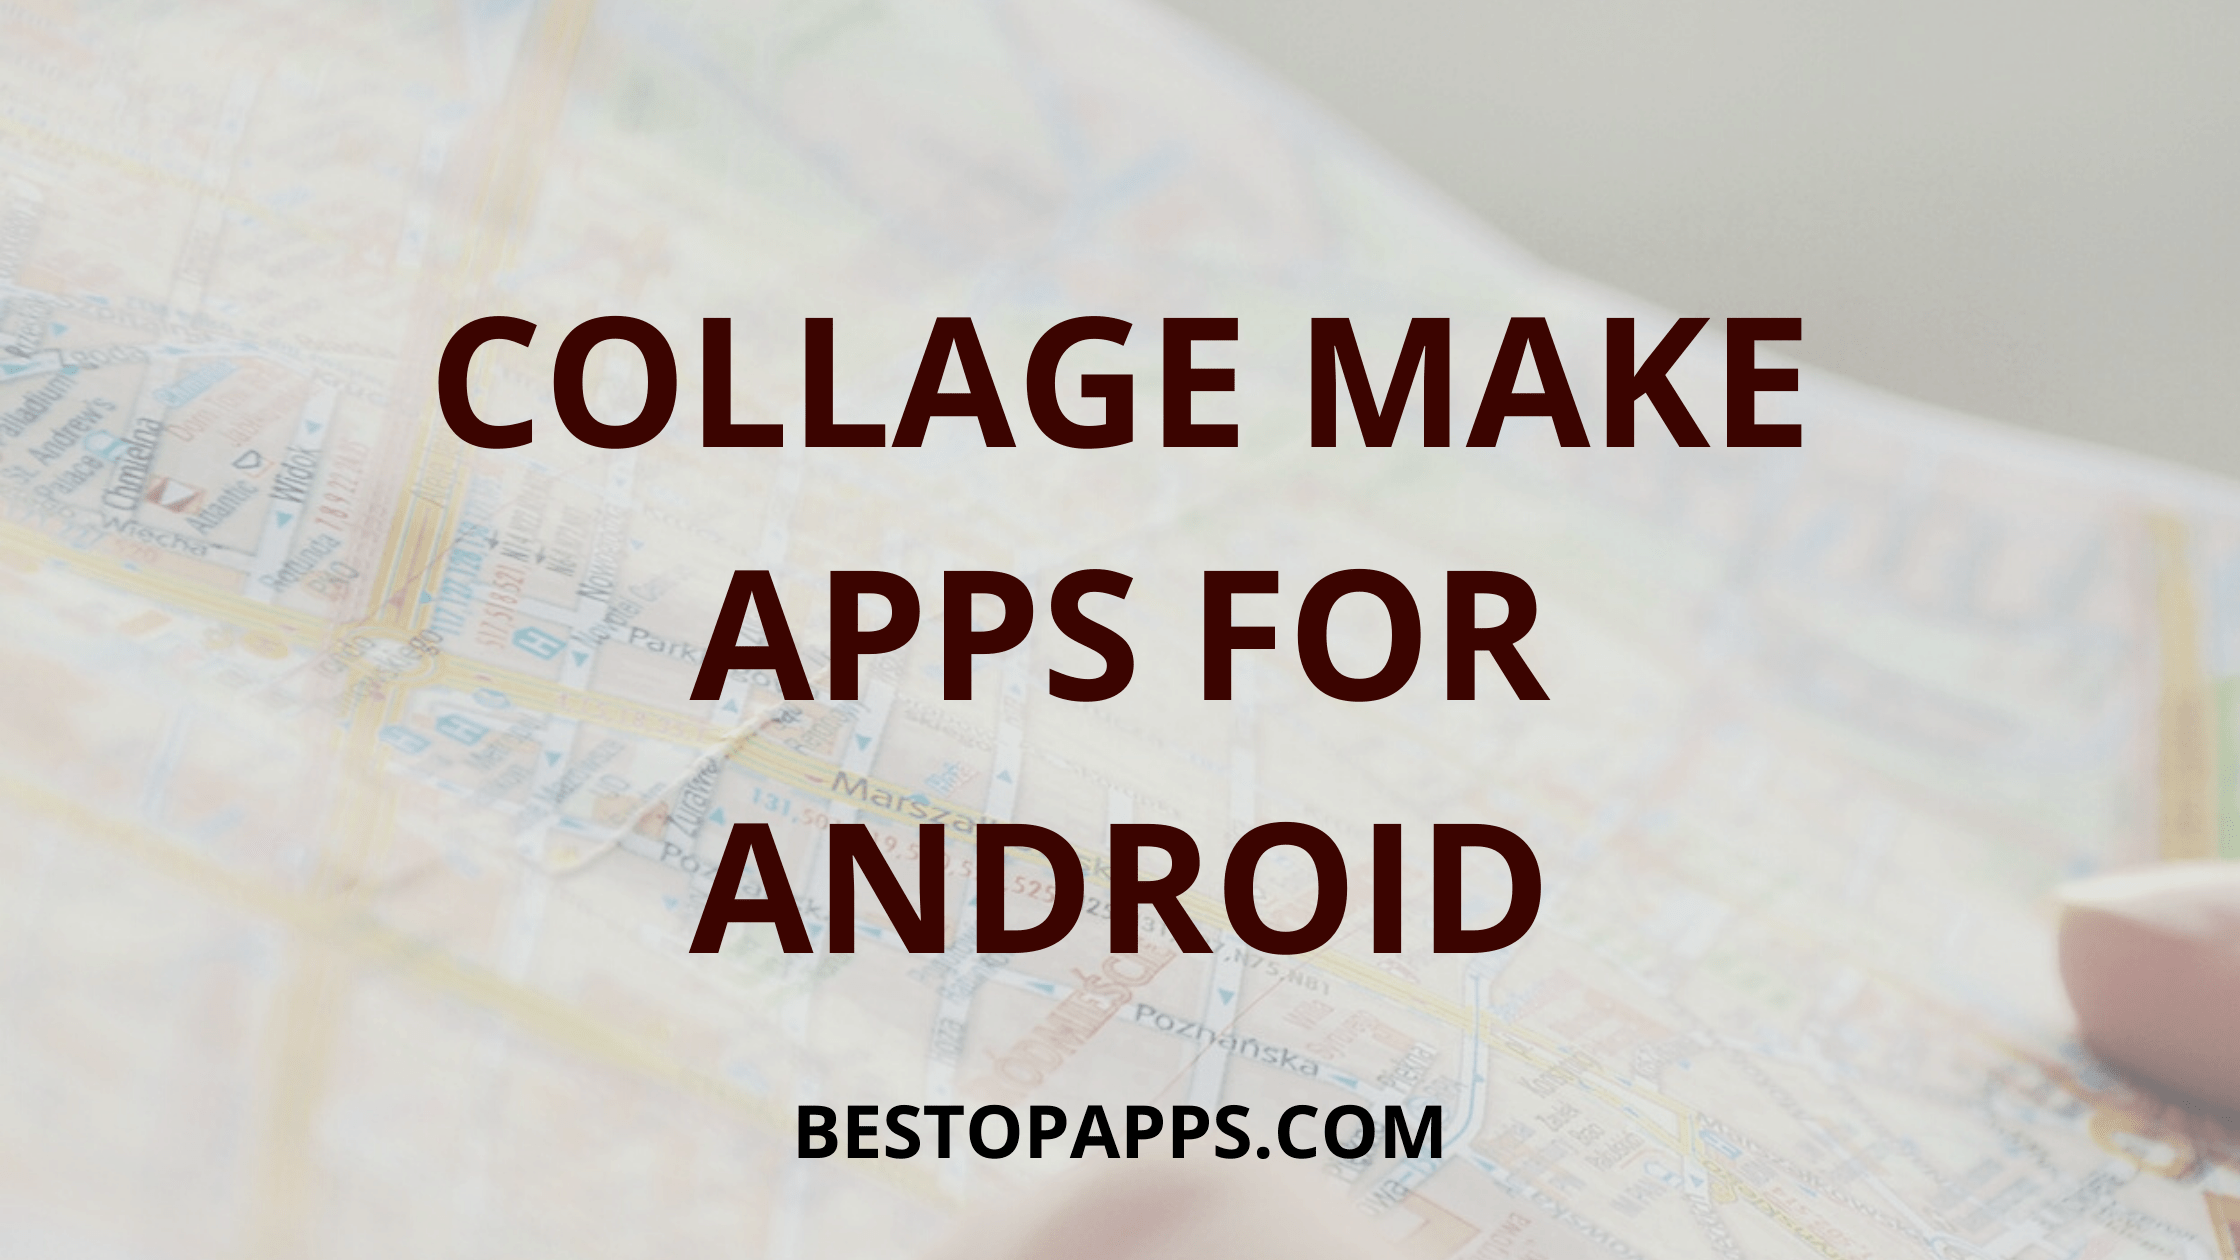 COLLAGE MAKE APPS FOR ANDROID